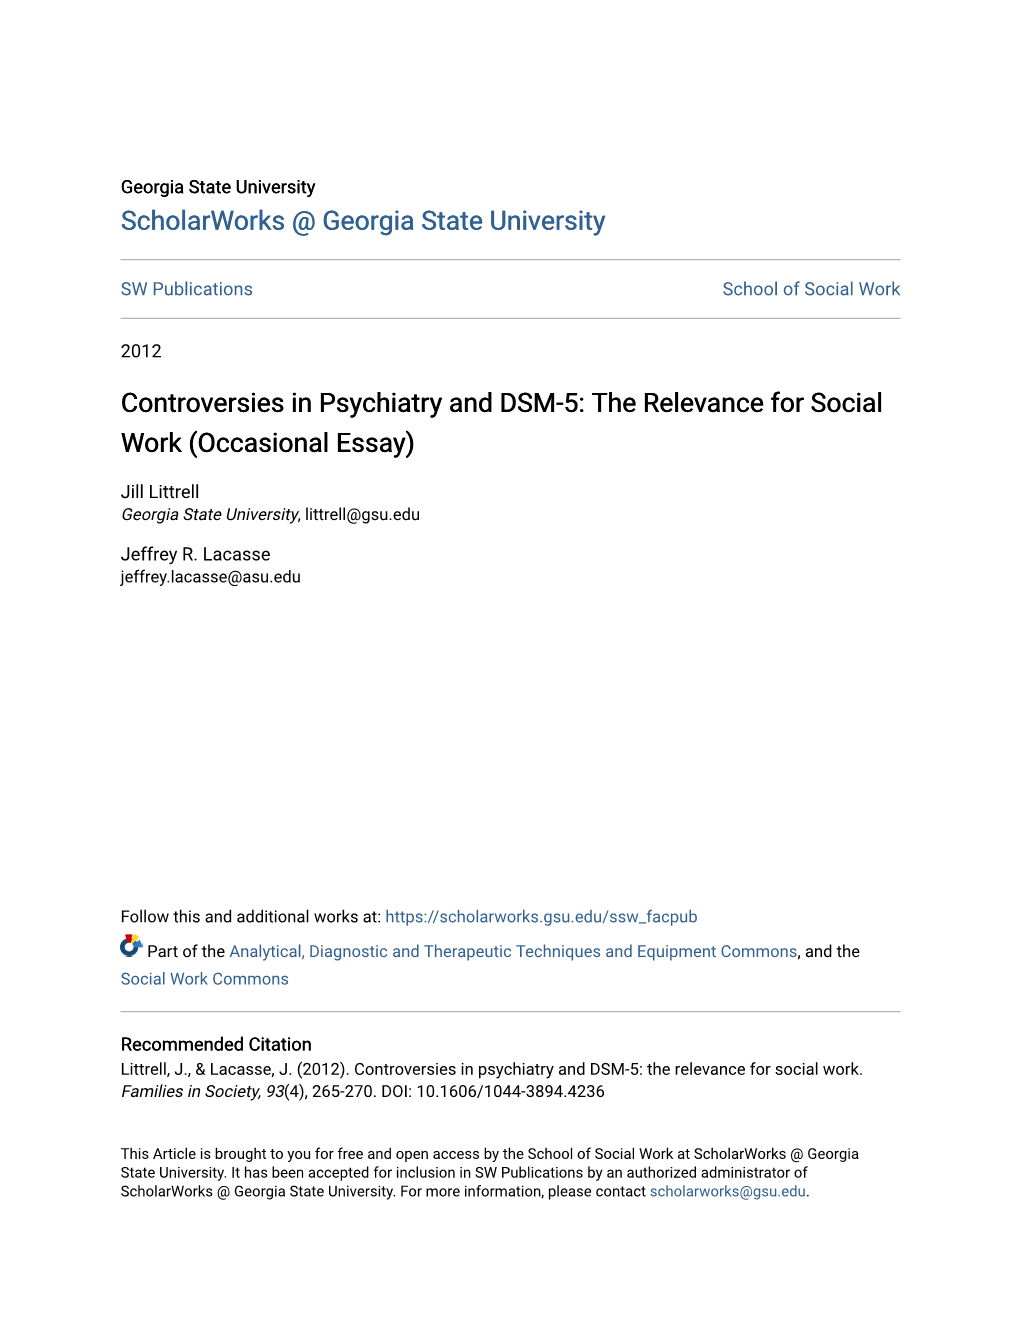 Controversies in Psychiatry and DSM-5: the Relevance for Social Work (Occasional Essay)